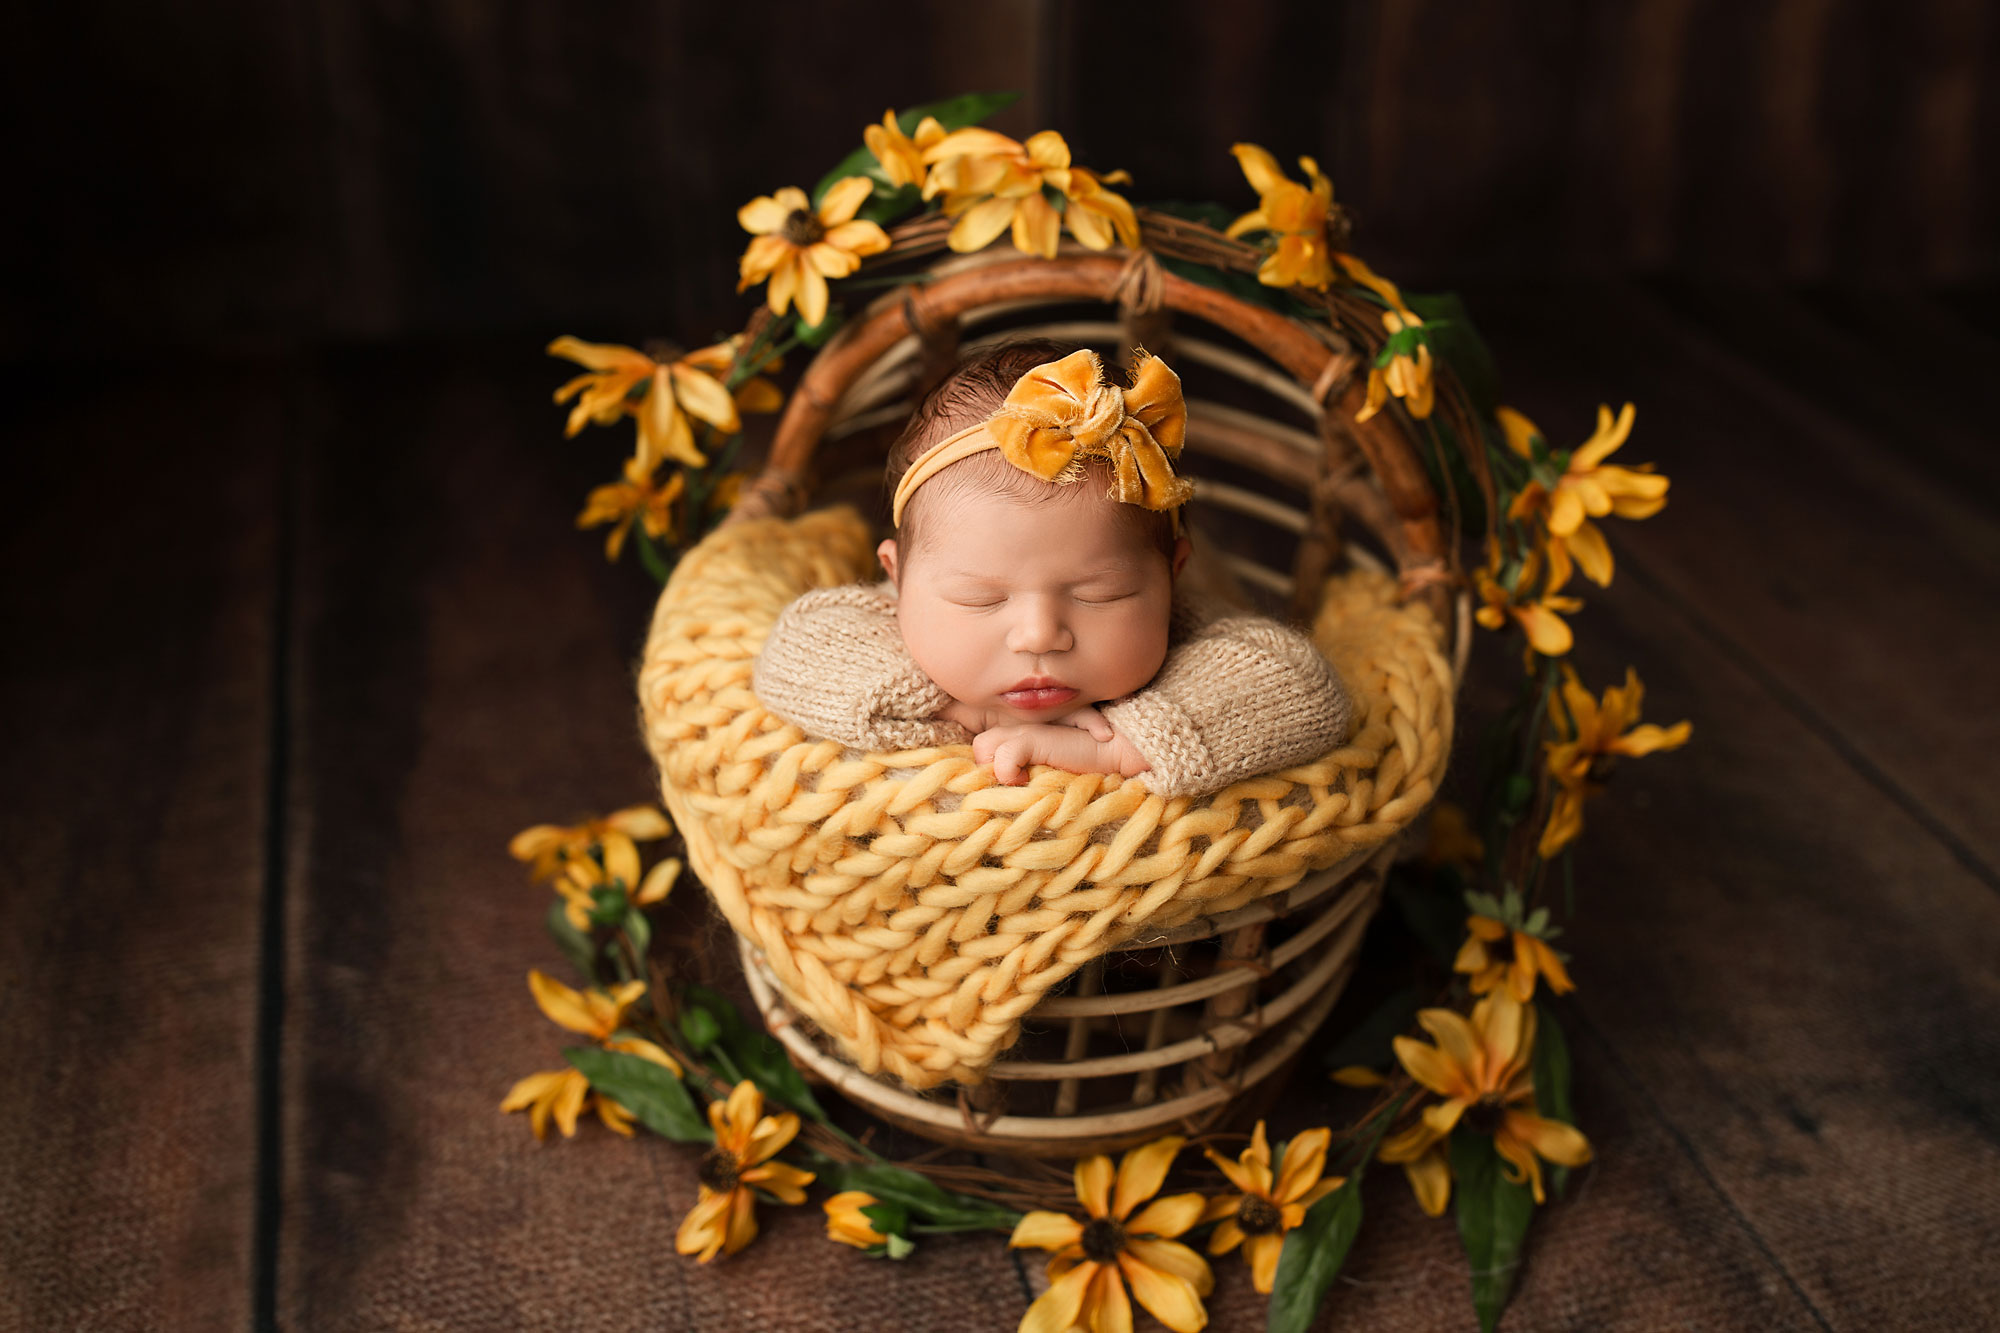 newborn baby in a basket with yellow sunflowers